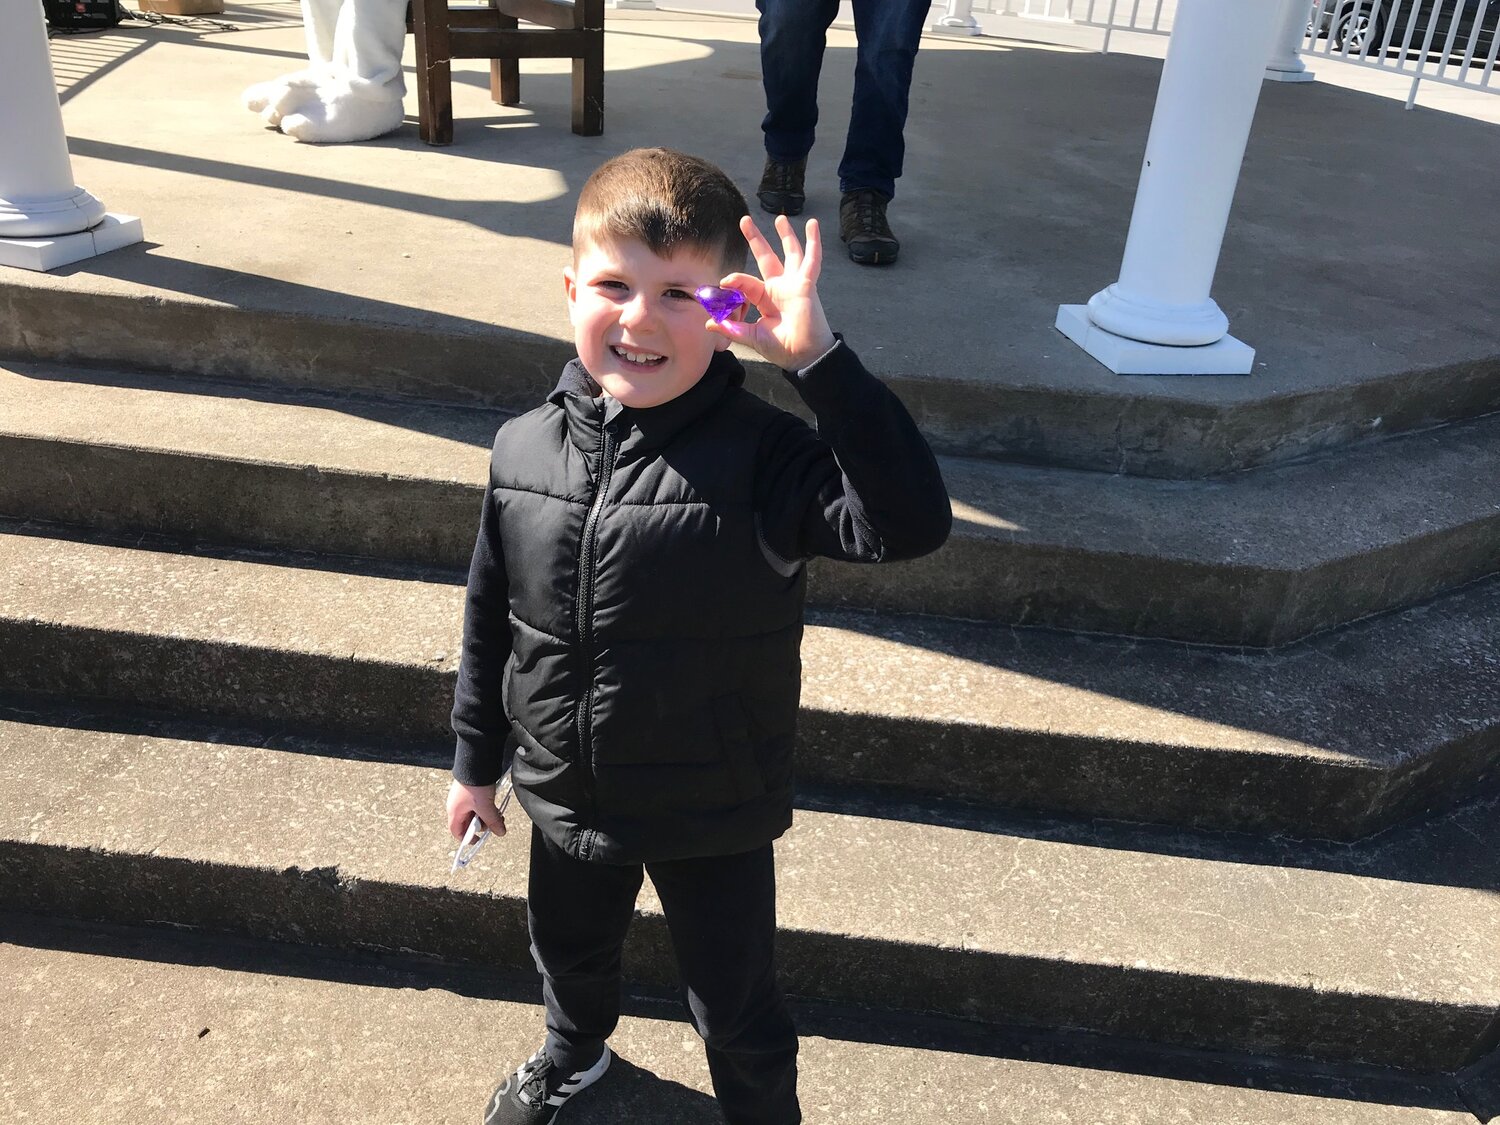 Dylan Burke shows off the treasured gem he found in a plastic egg during the Easter Egg Hunt Saturday, April 8 in Sherrill.